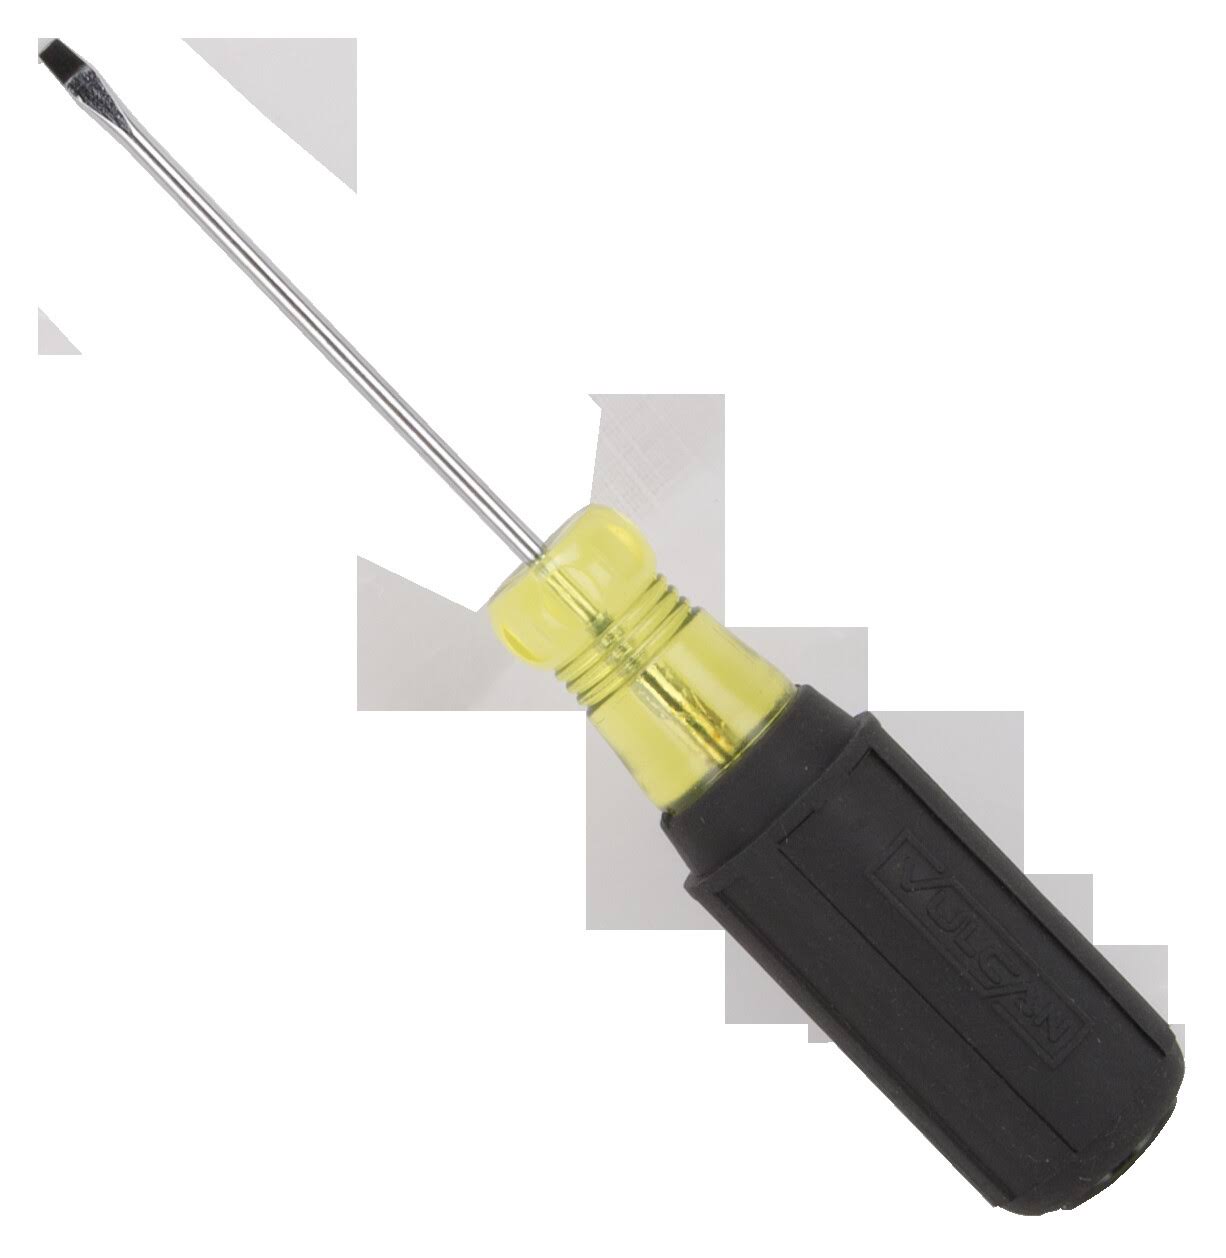 Vulcan Mp-sd01 Slotted Screwdriver, 1/8" x 3"